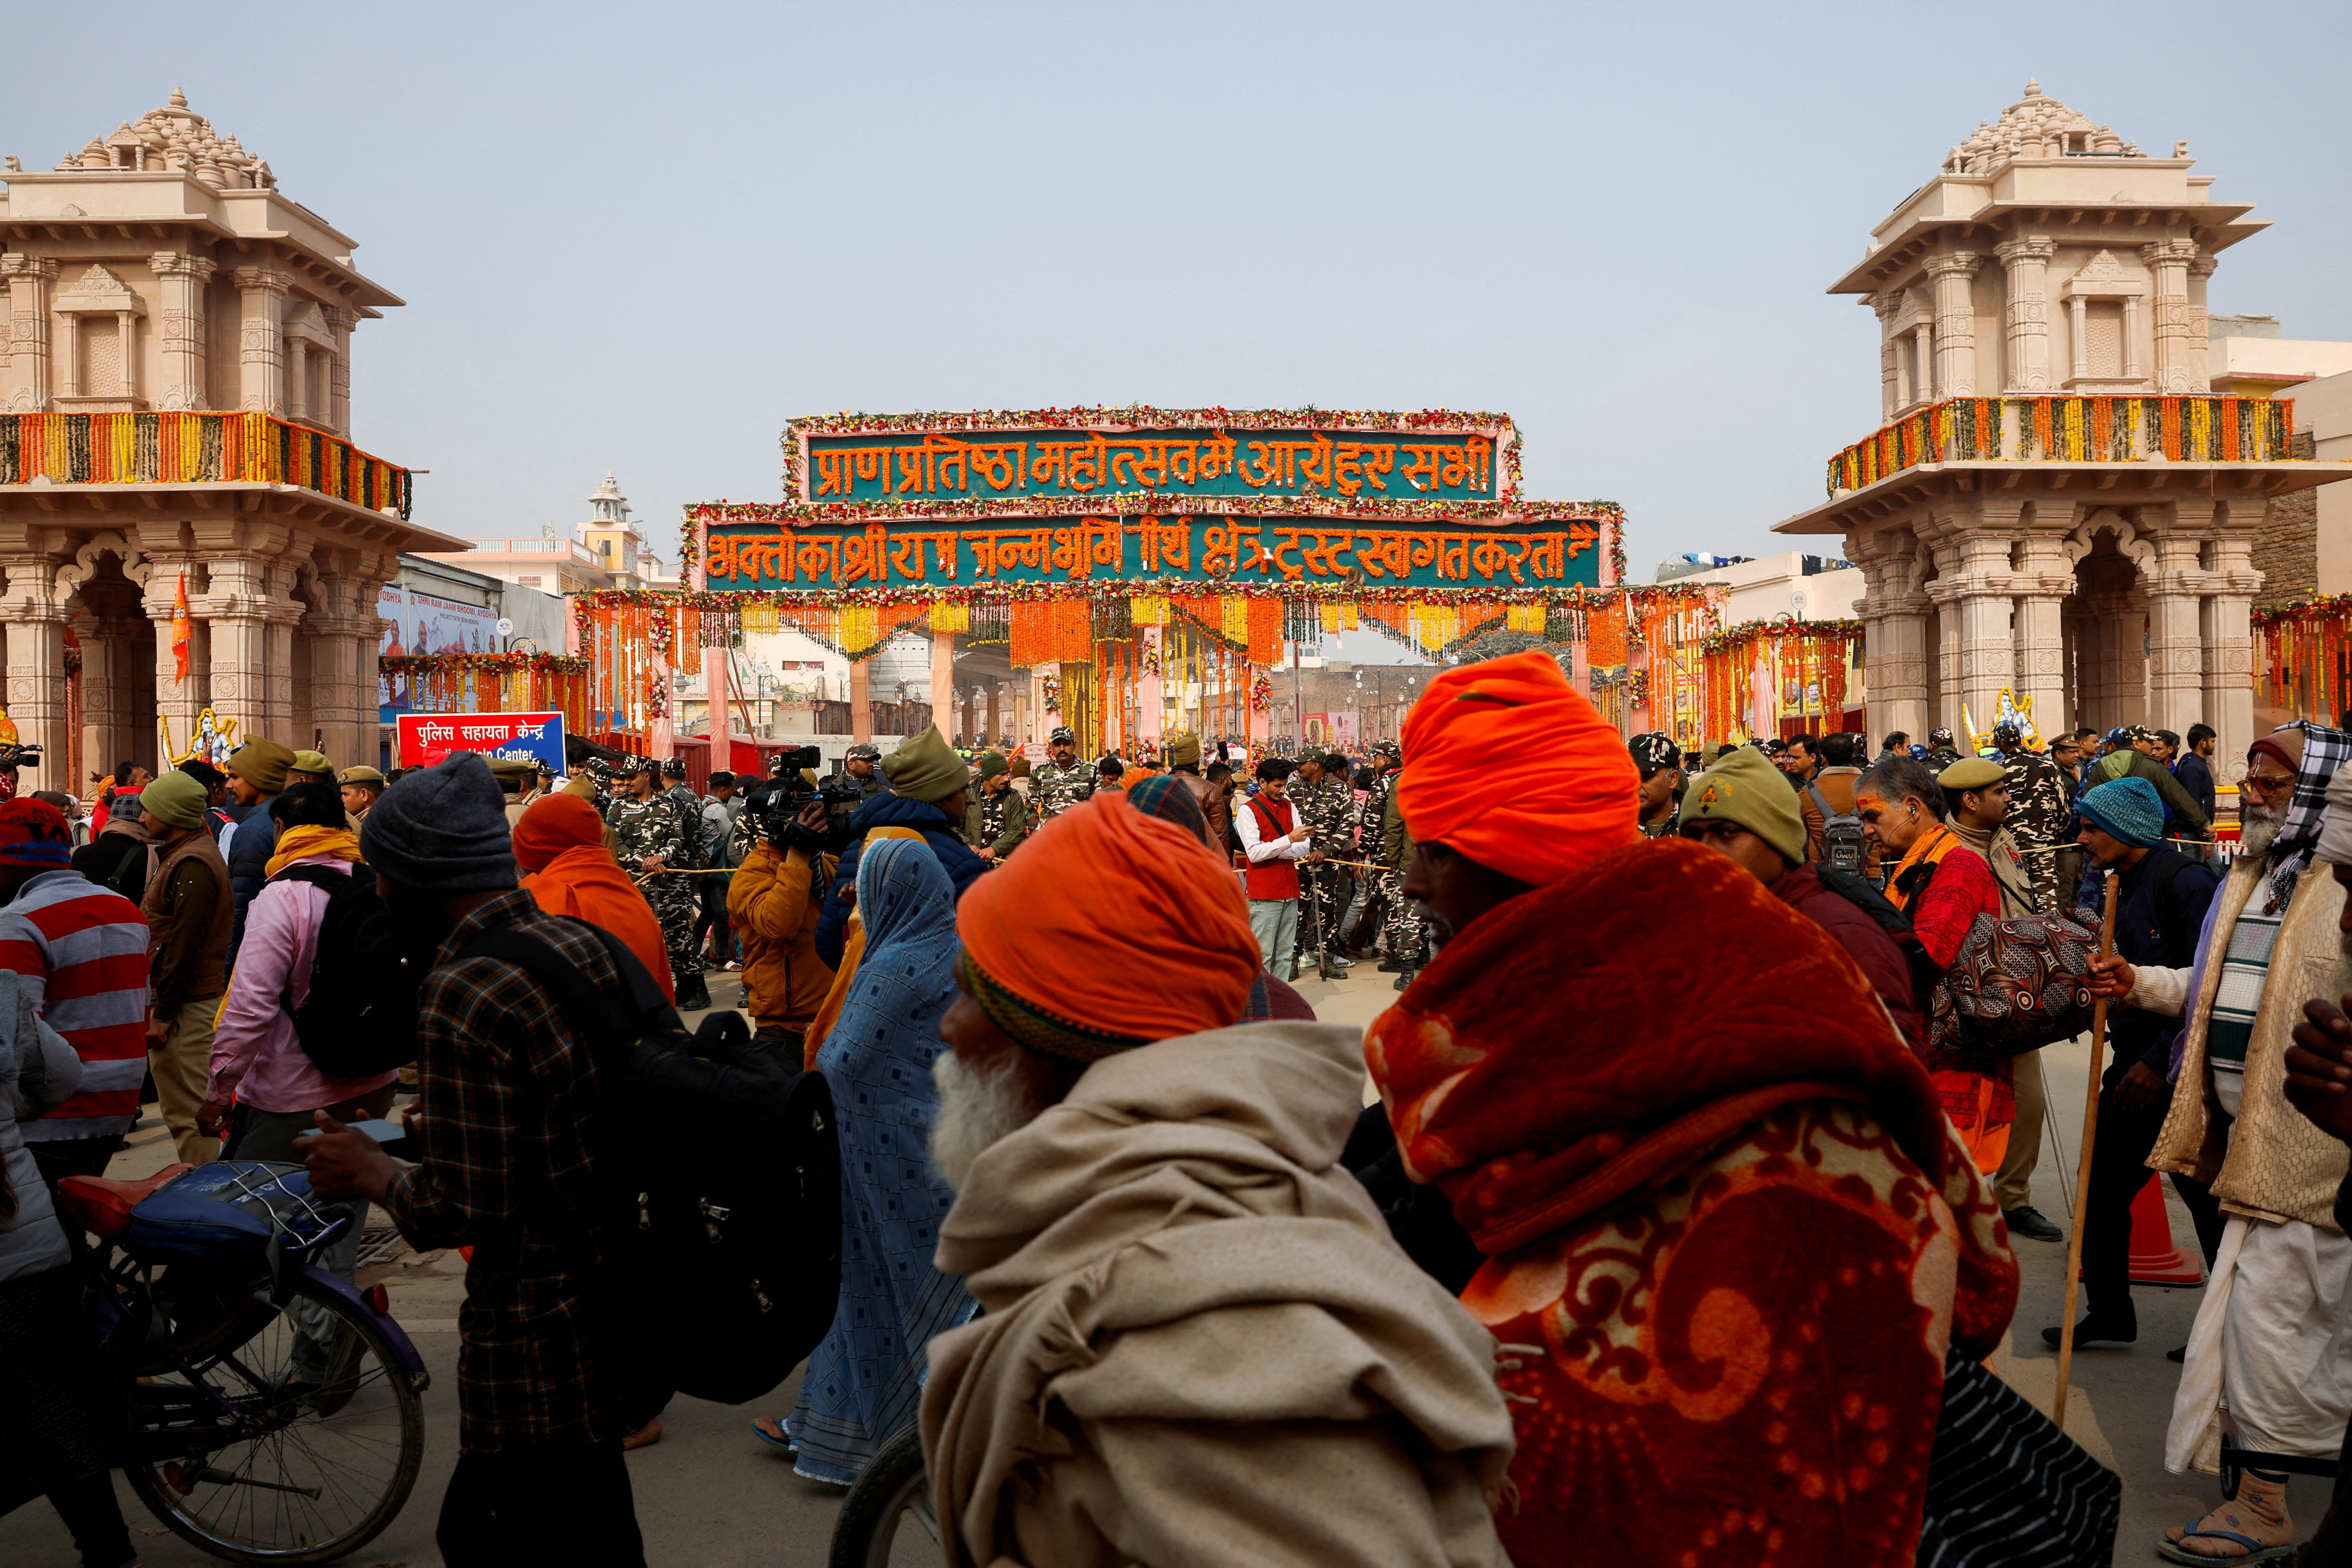 Hindu devotees wait to enter the Hindu god Lord Ram temple after its inauguration in Ayodhya